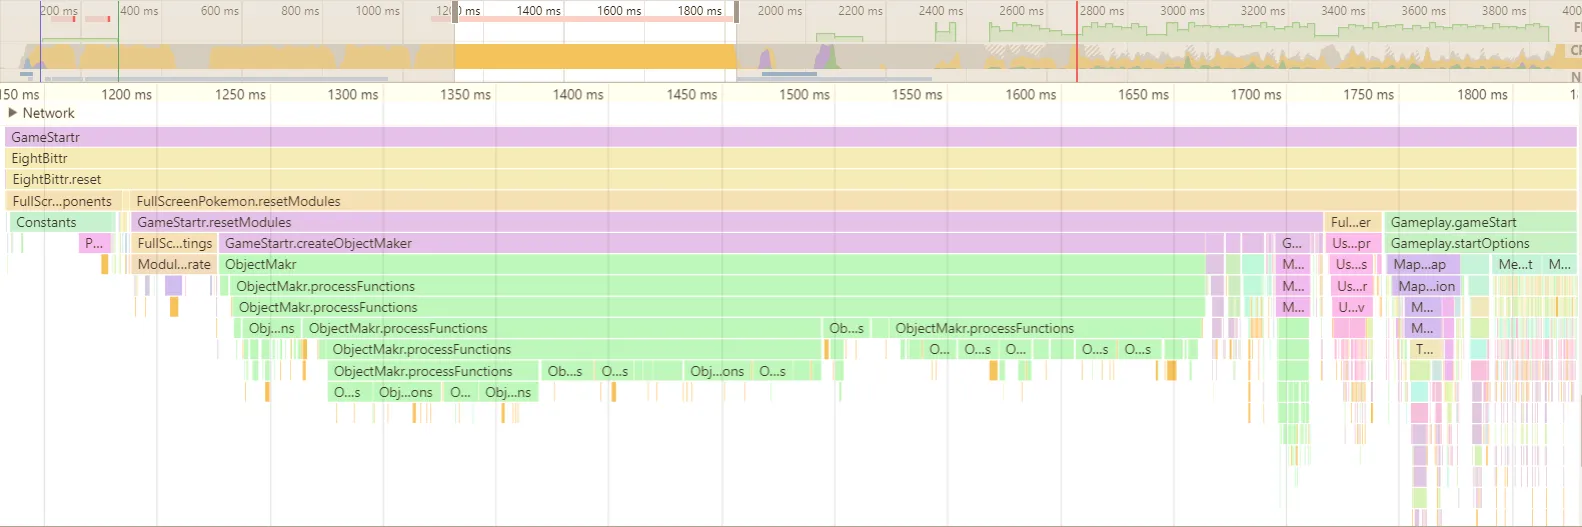 Screenshot of a performance profile within a GameStartr class taking ~700ms. Most of the time is spent in FullScreenPokemon.resetModules, and within that ObjectMakr.processFunctions.